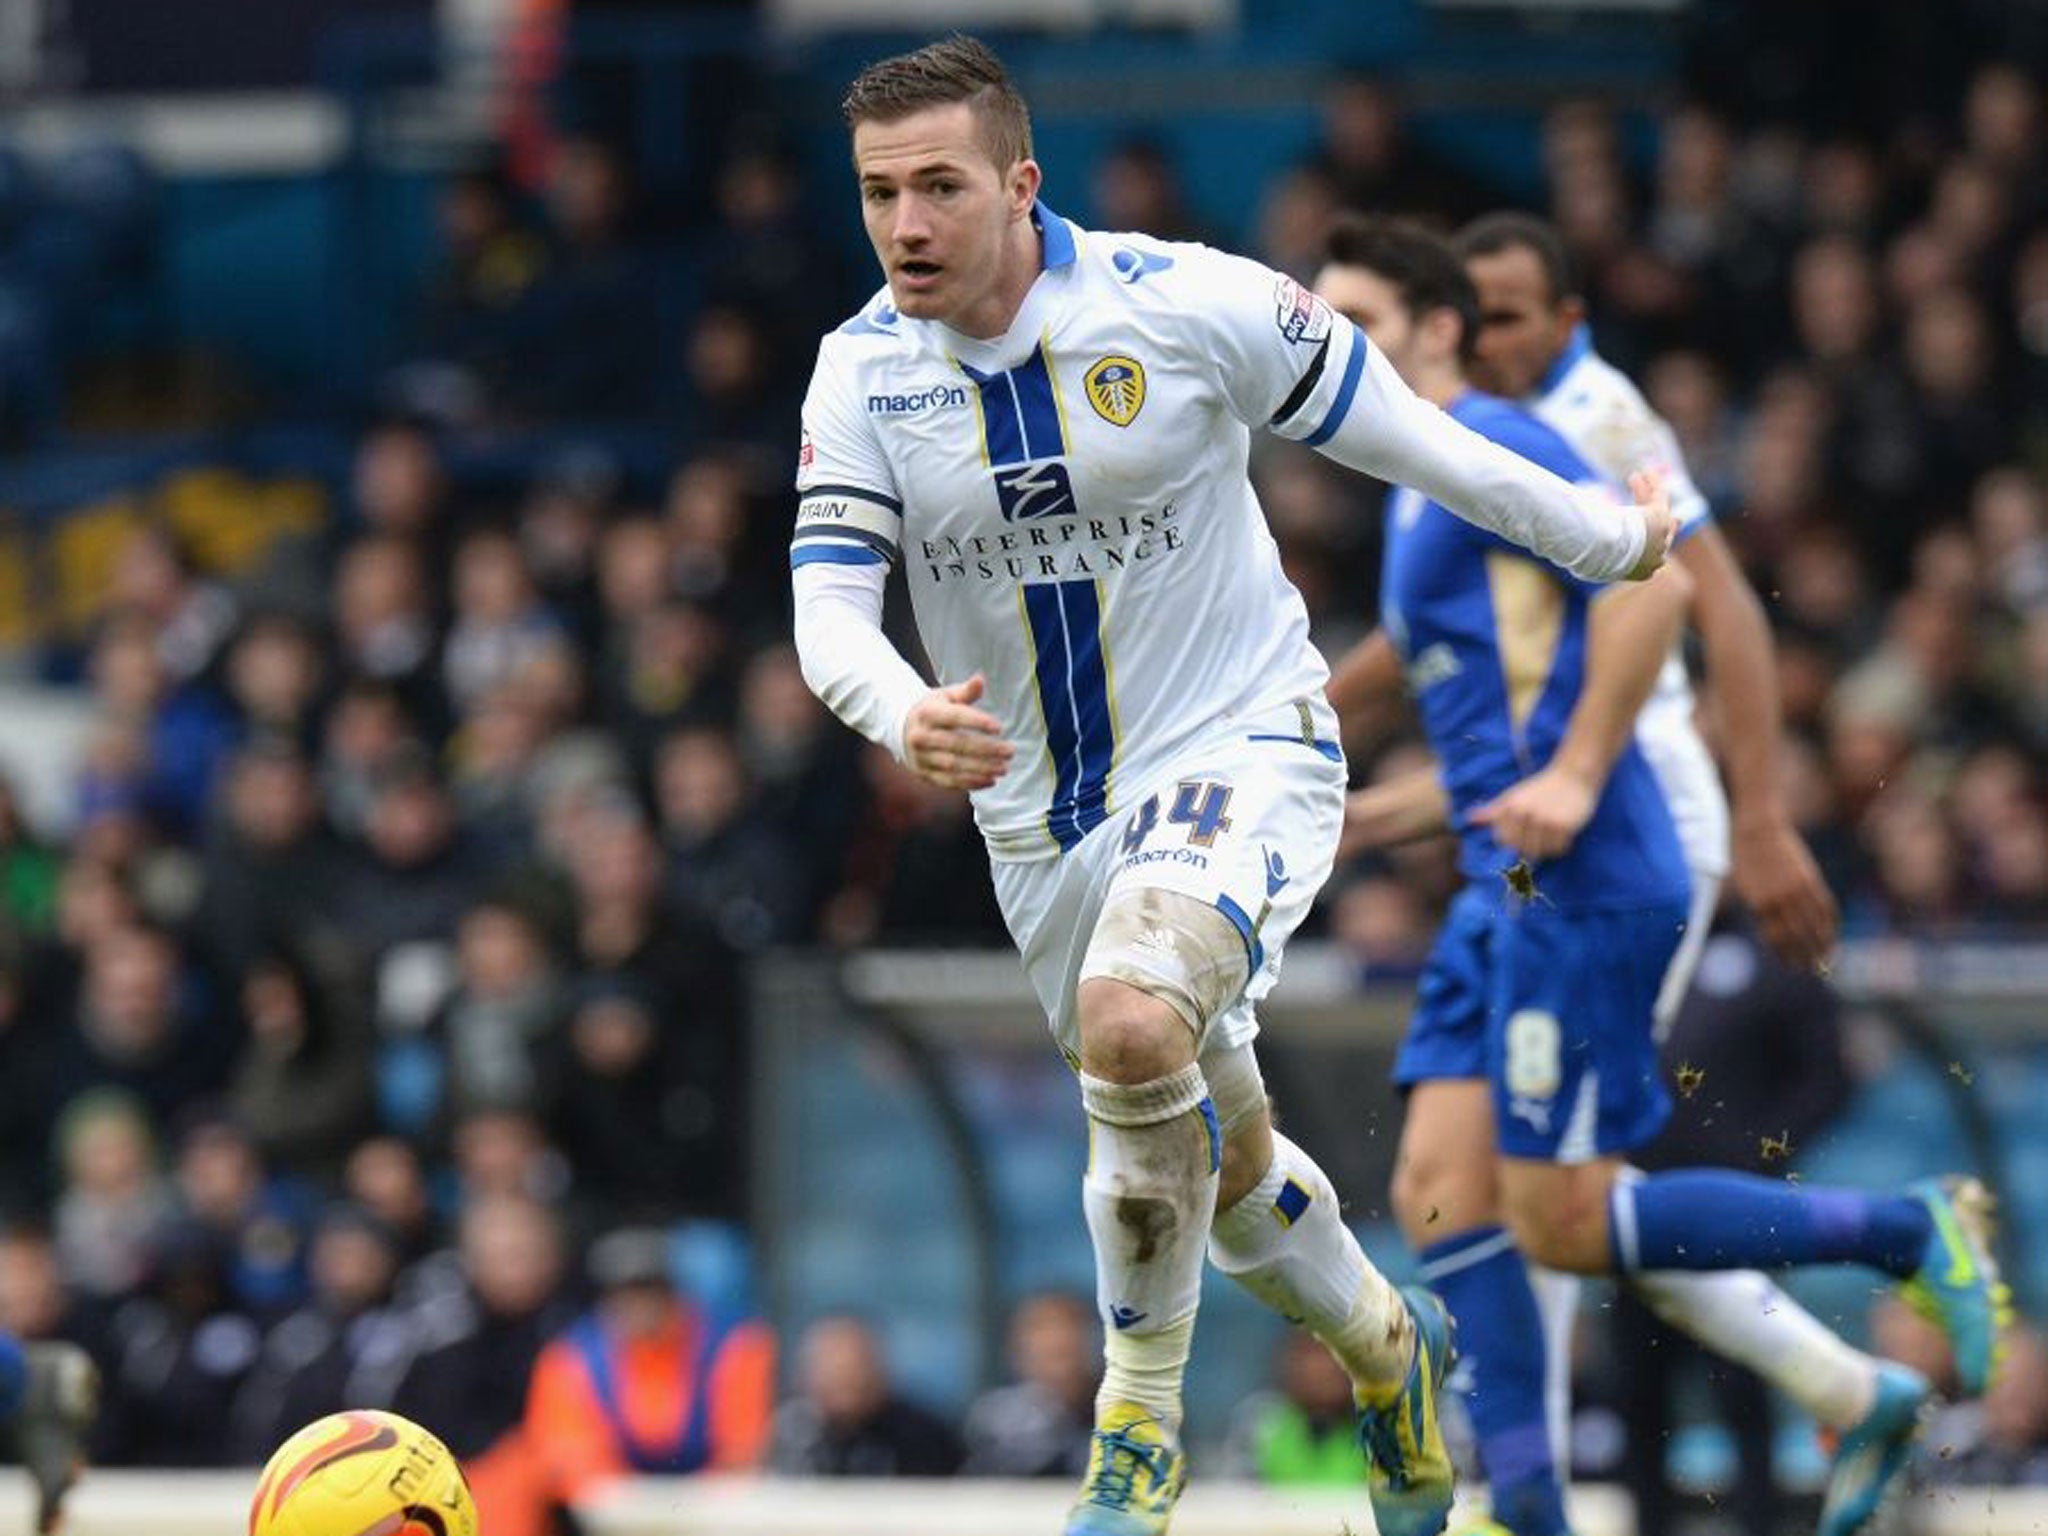 Ross McCormack is the Leed's United's top scorer